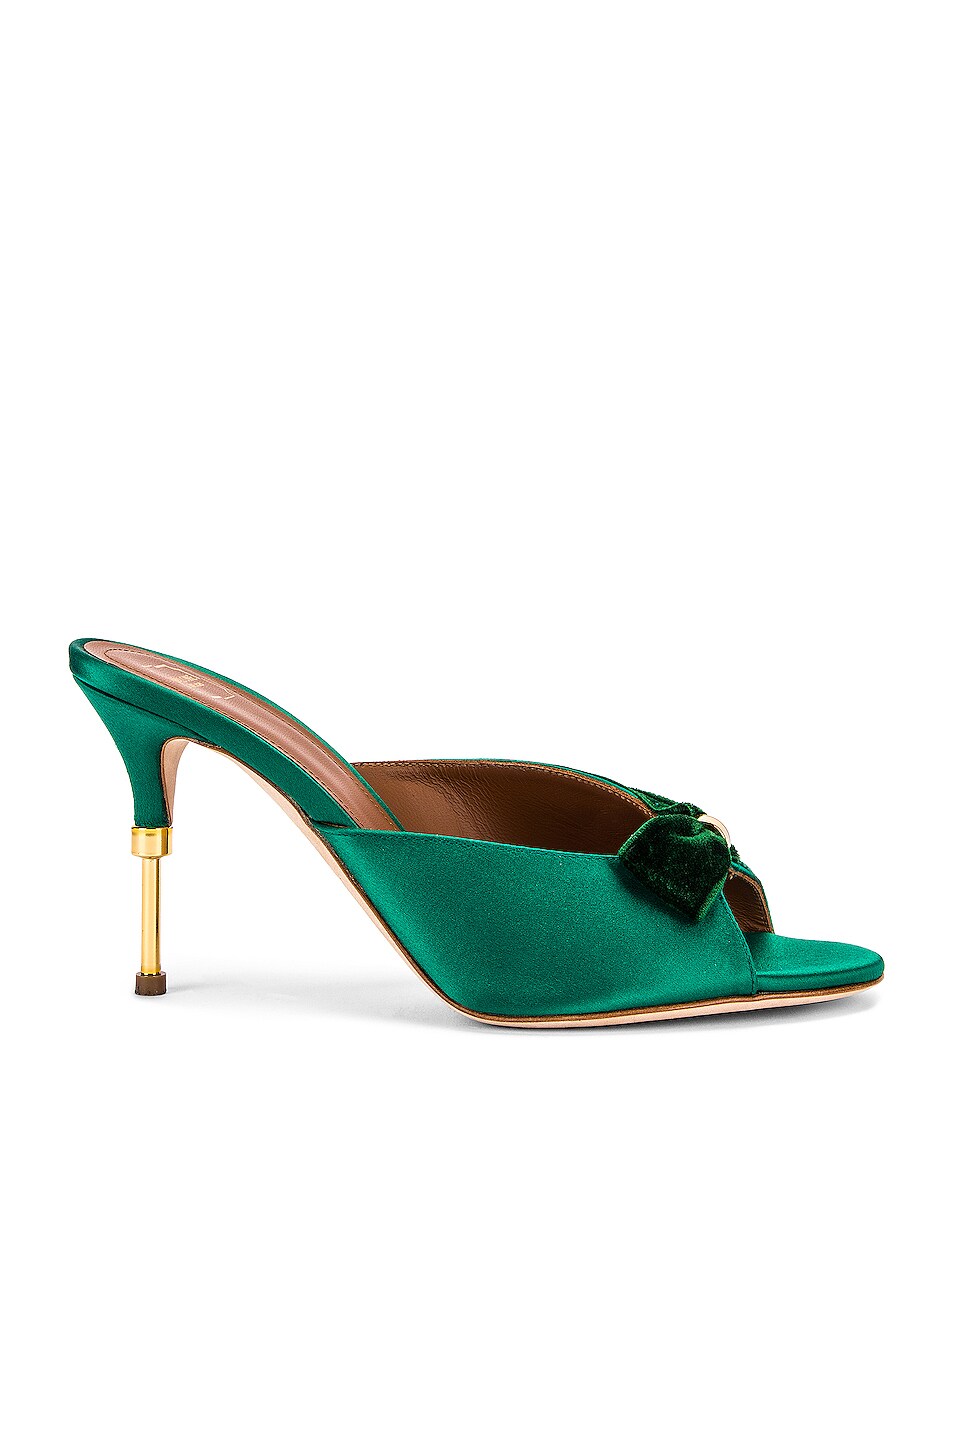 Image 1 of Malone Souliers Paiige 85 Heel in Emerald